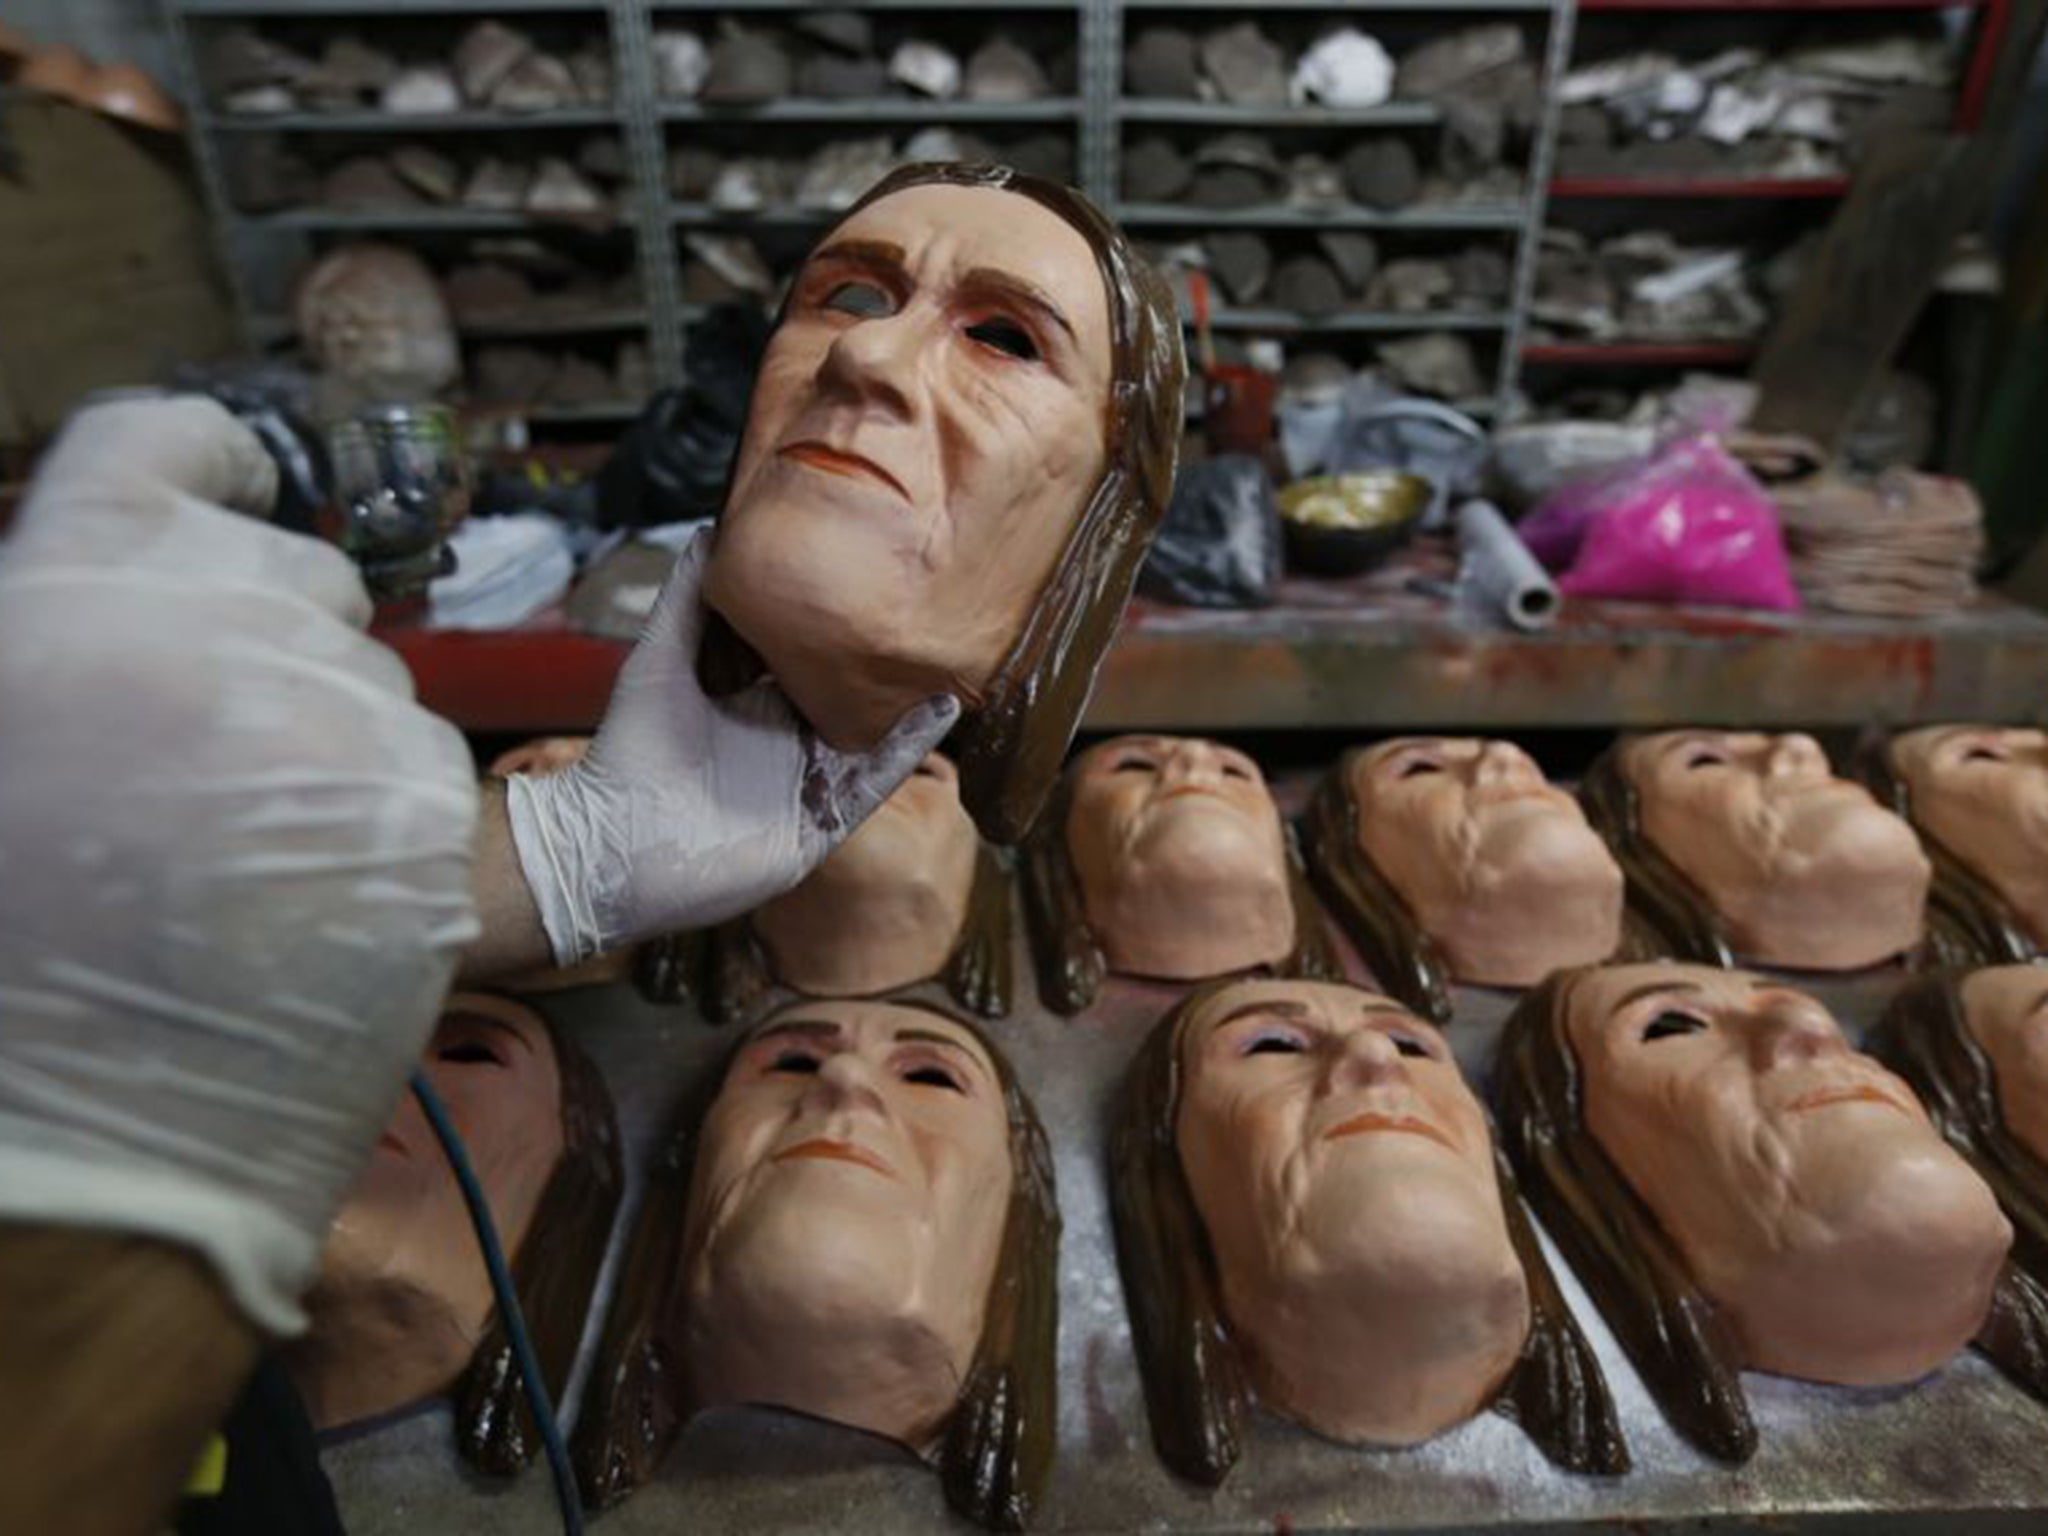 Masks of Maria das Graças Silva Foster, former Petrobras CEO, being prepared for the Rio Carnival, reflecting the high public profile of the unfolding scandal